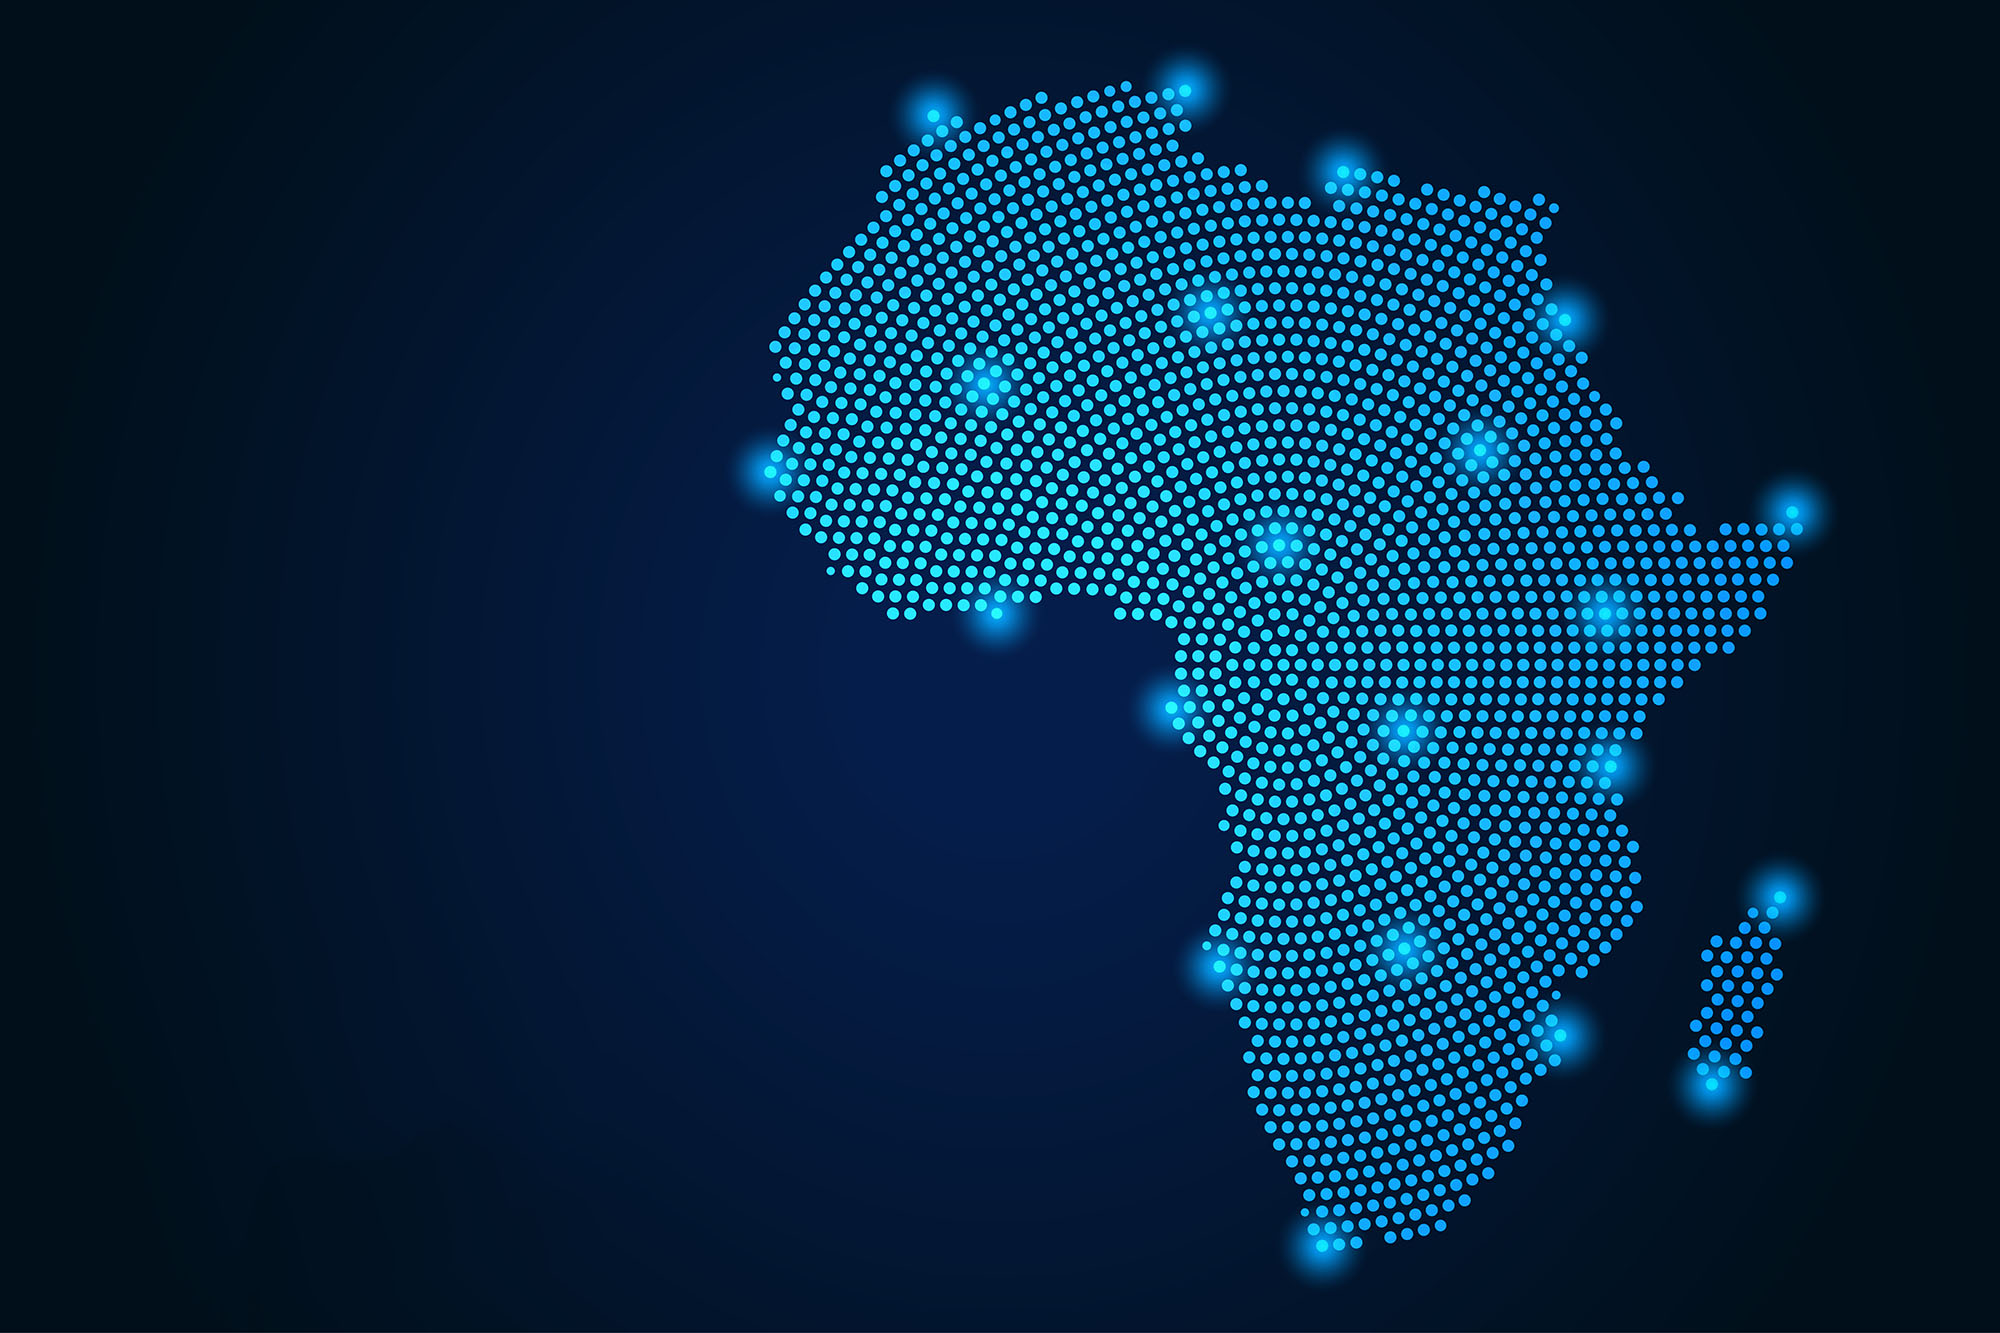 Abstract image Africa map from point blue and glowing stars on a dark background. vector illustration. Vector eps 10.